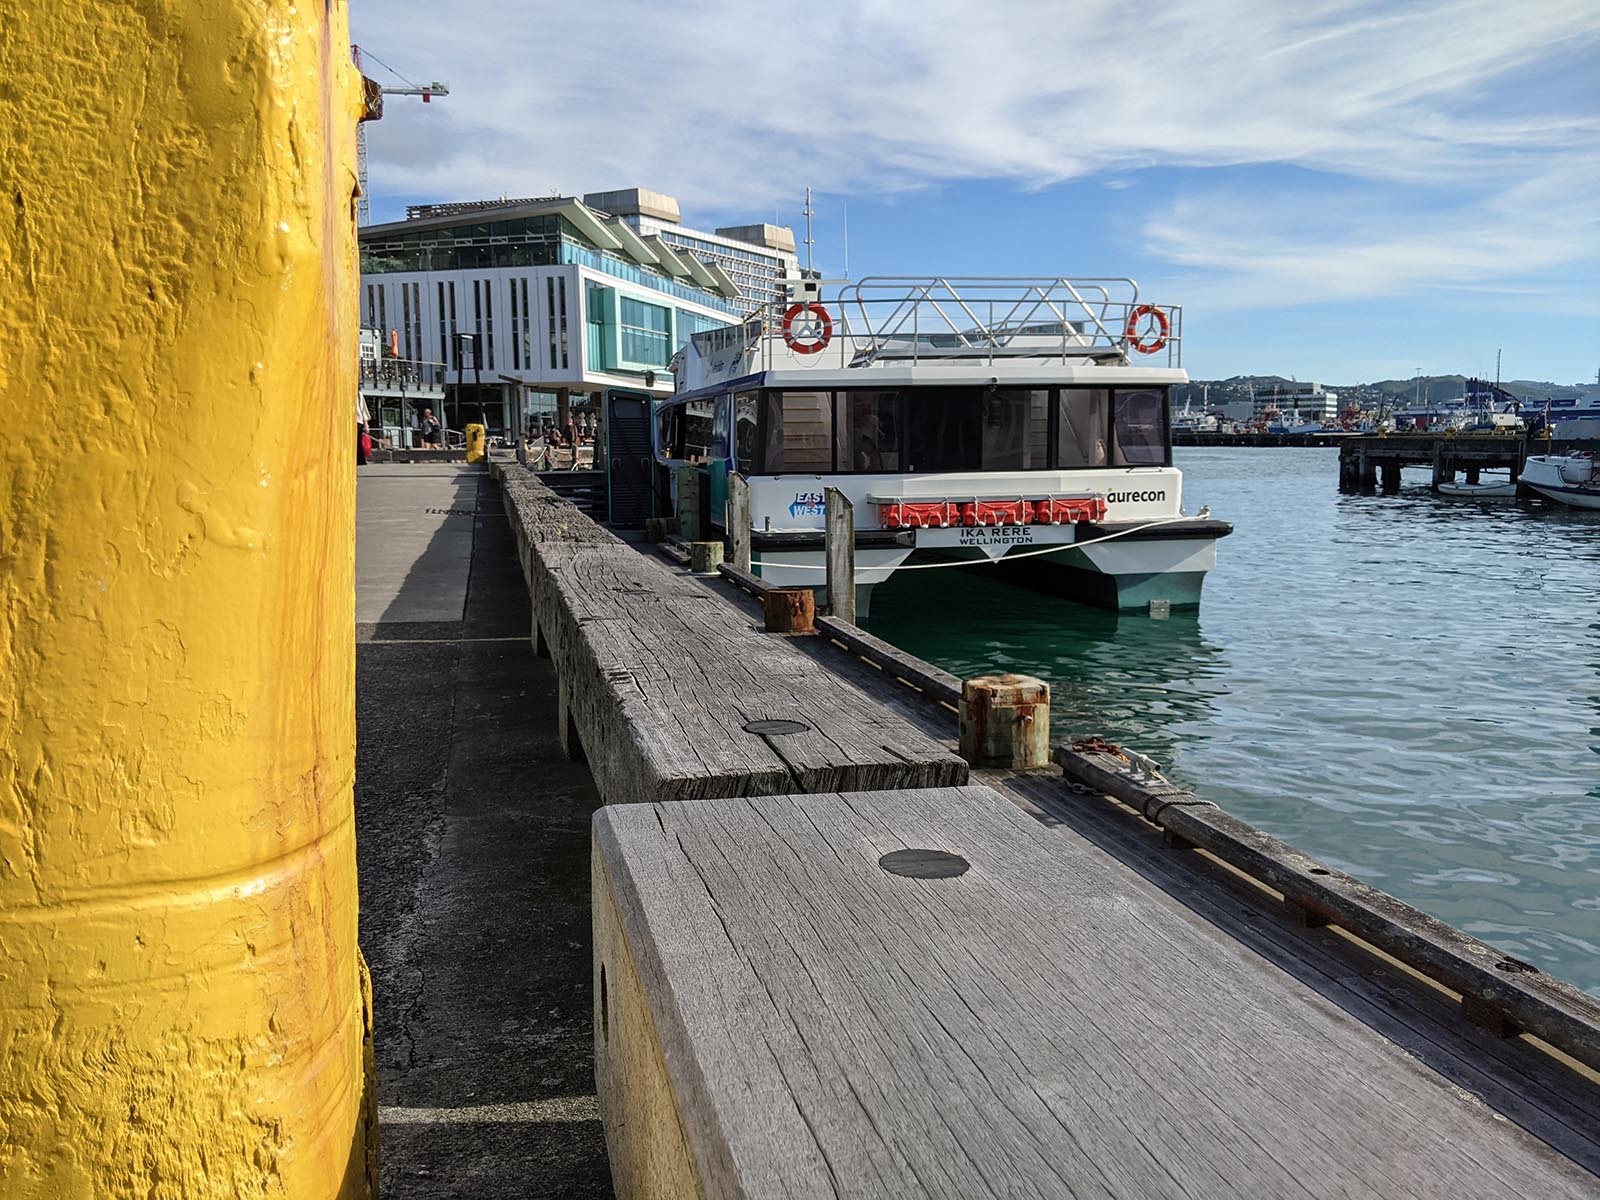 Ika Rere electric ferry on Wellington Harbour